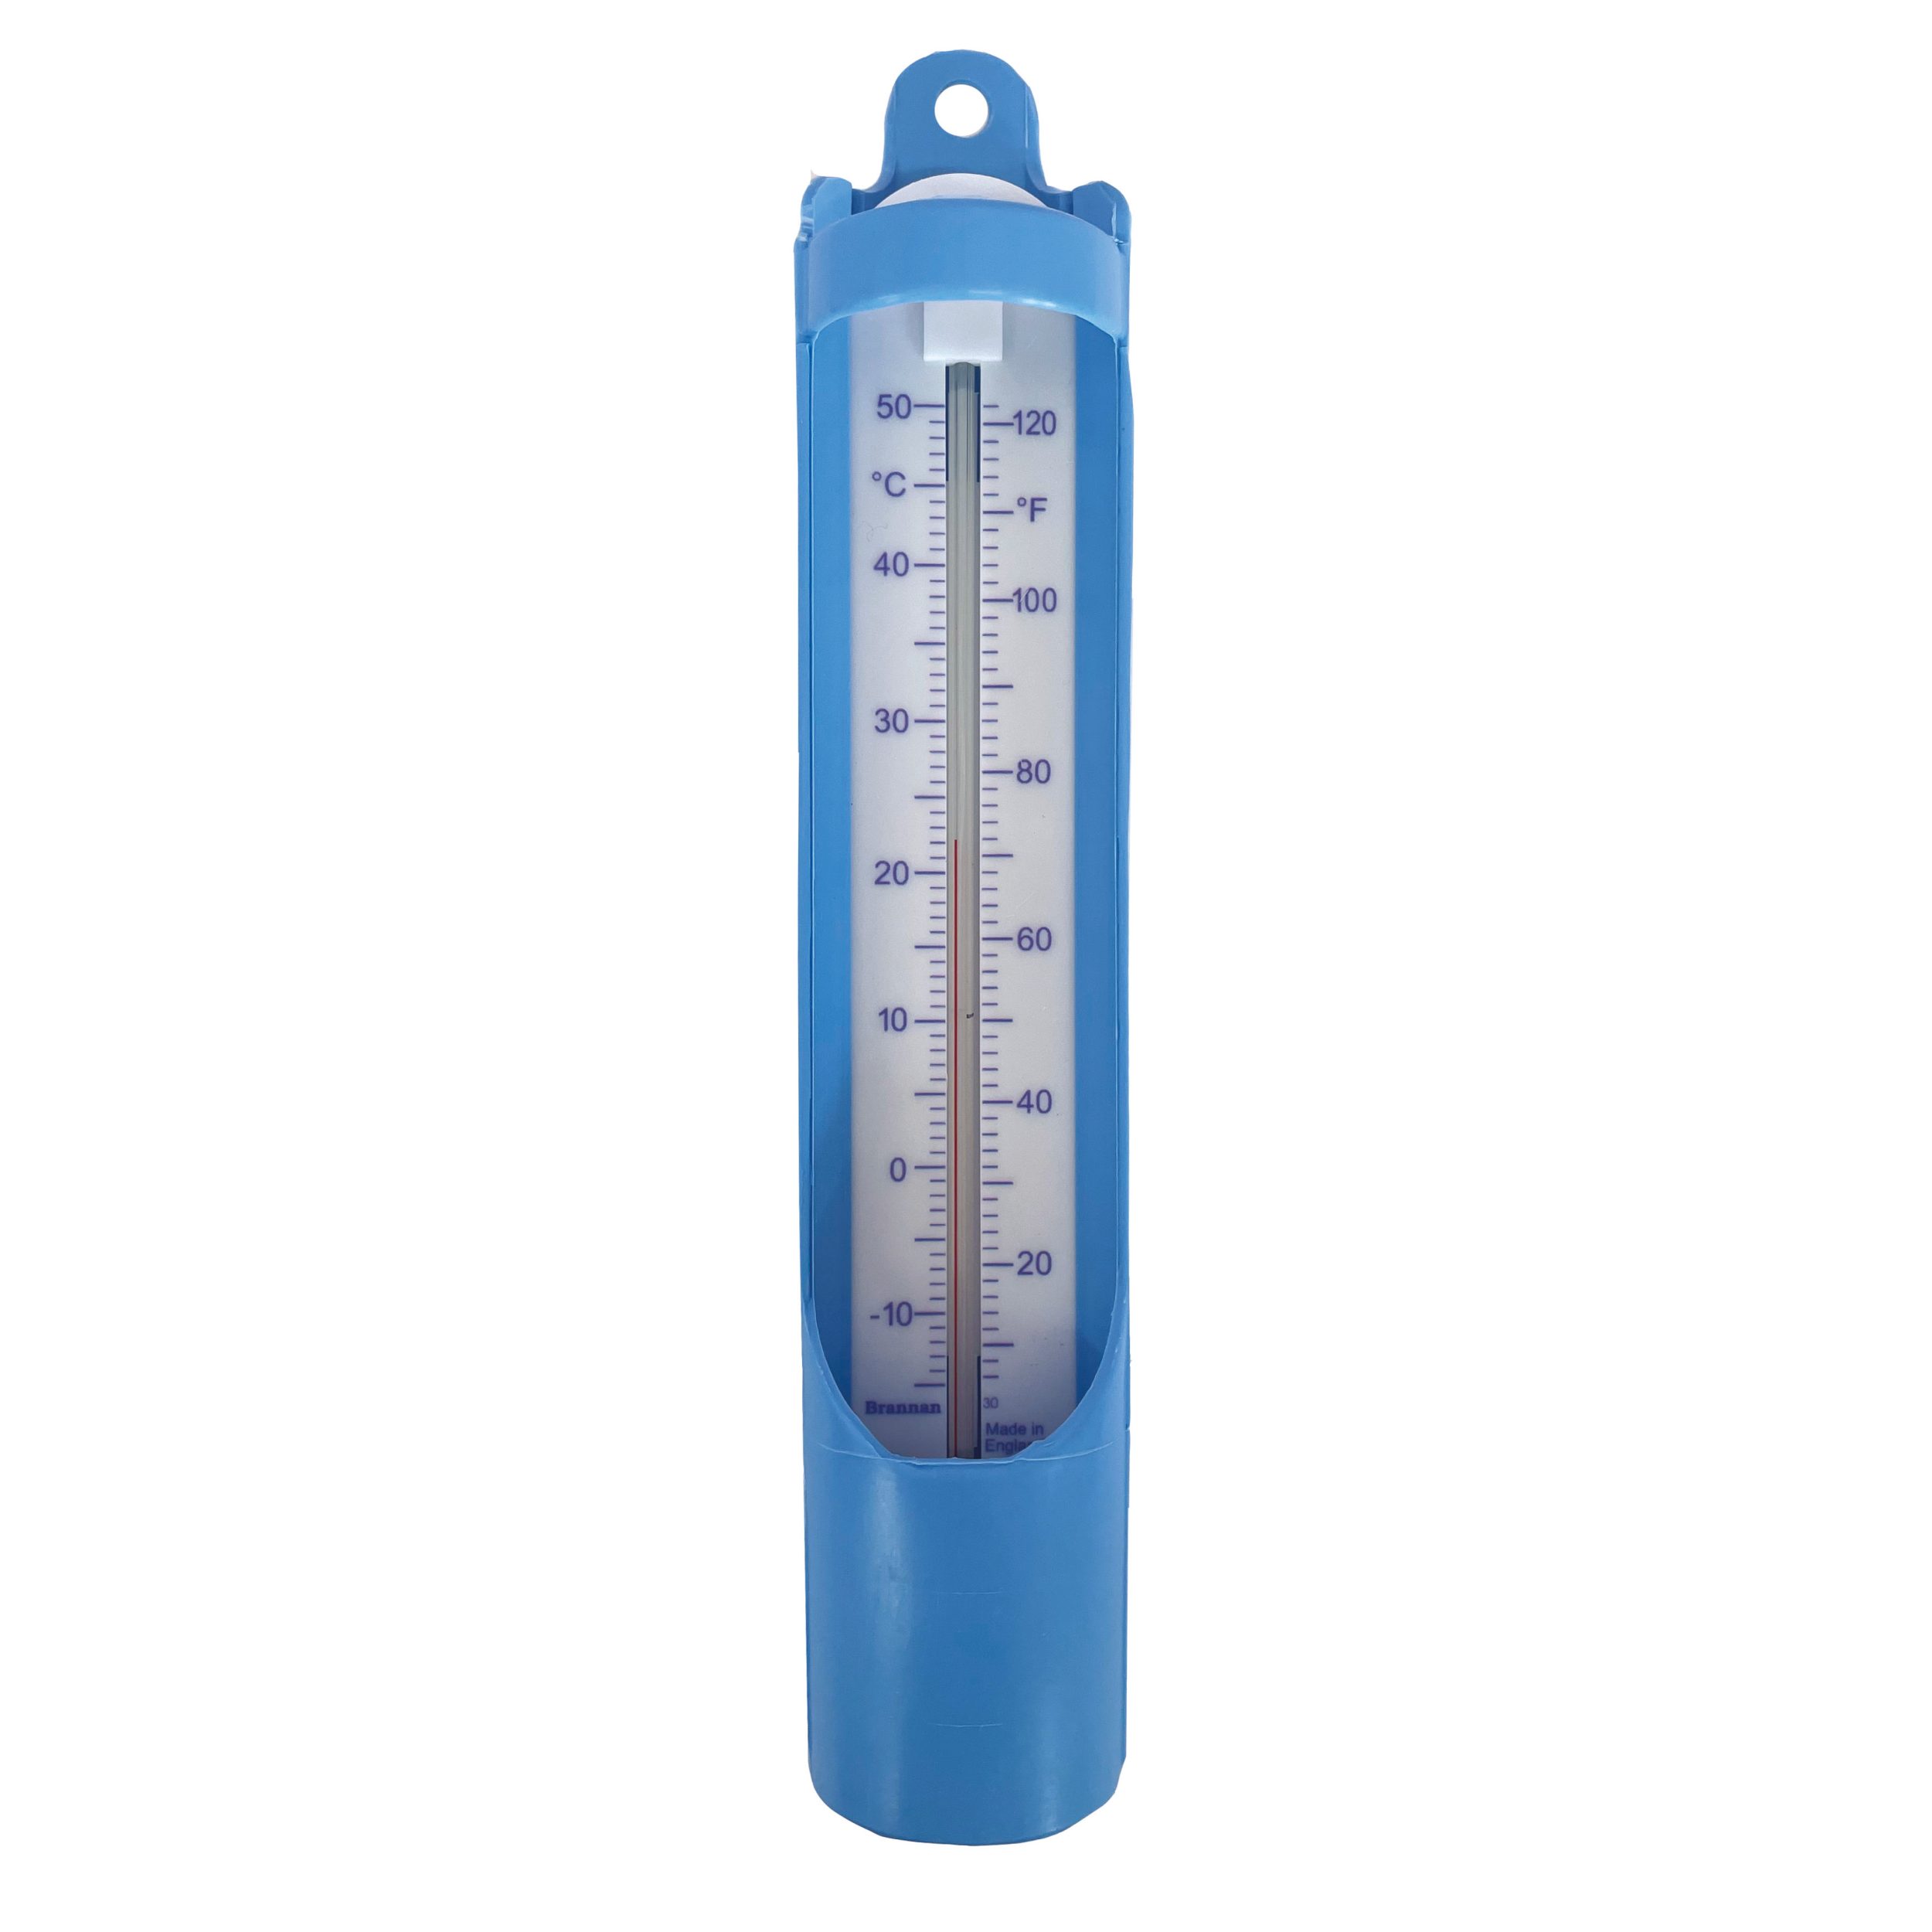 Scoop pool thermometer